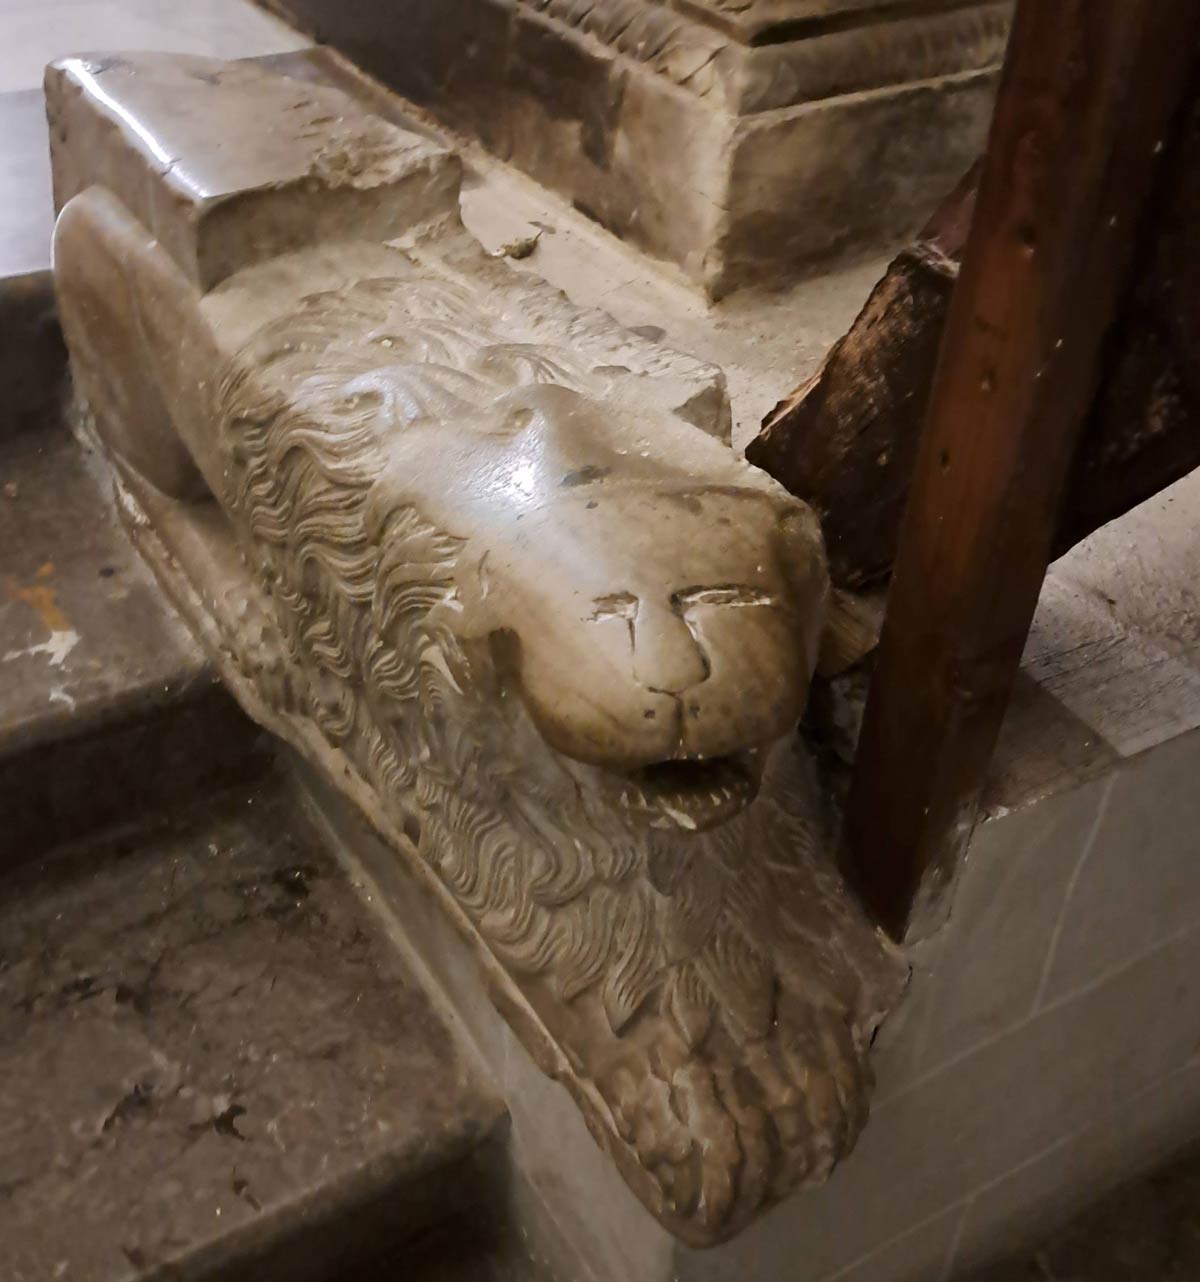 Excessively petted lion statue